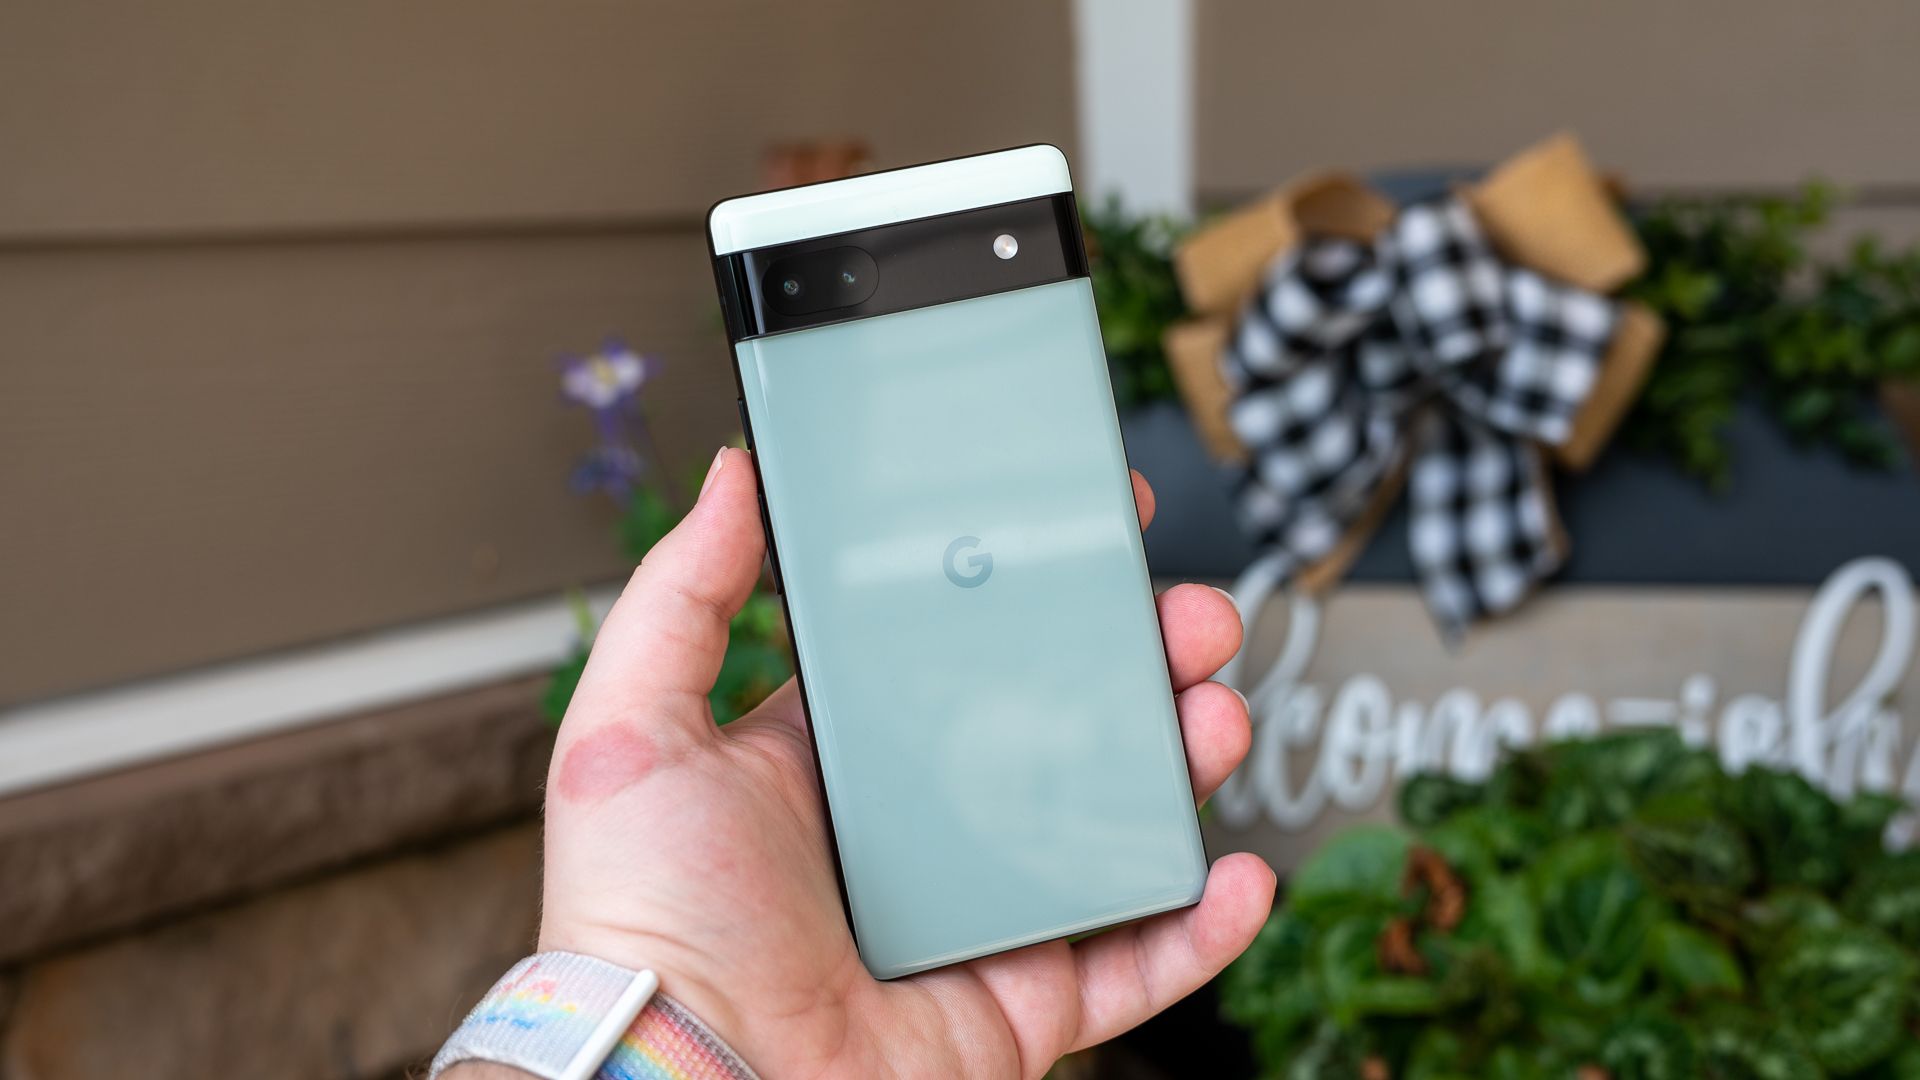 Pixel 6a held in person's hand